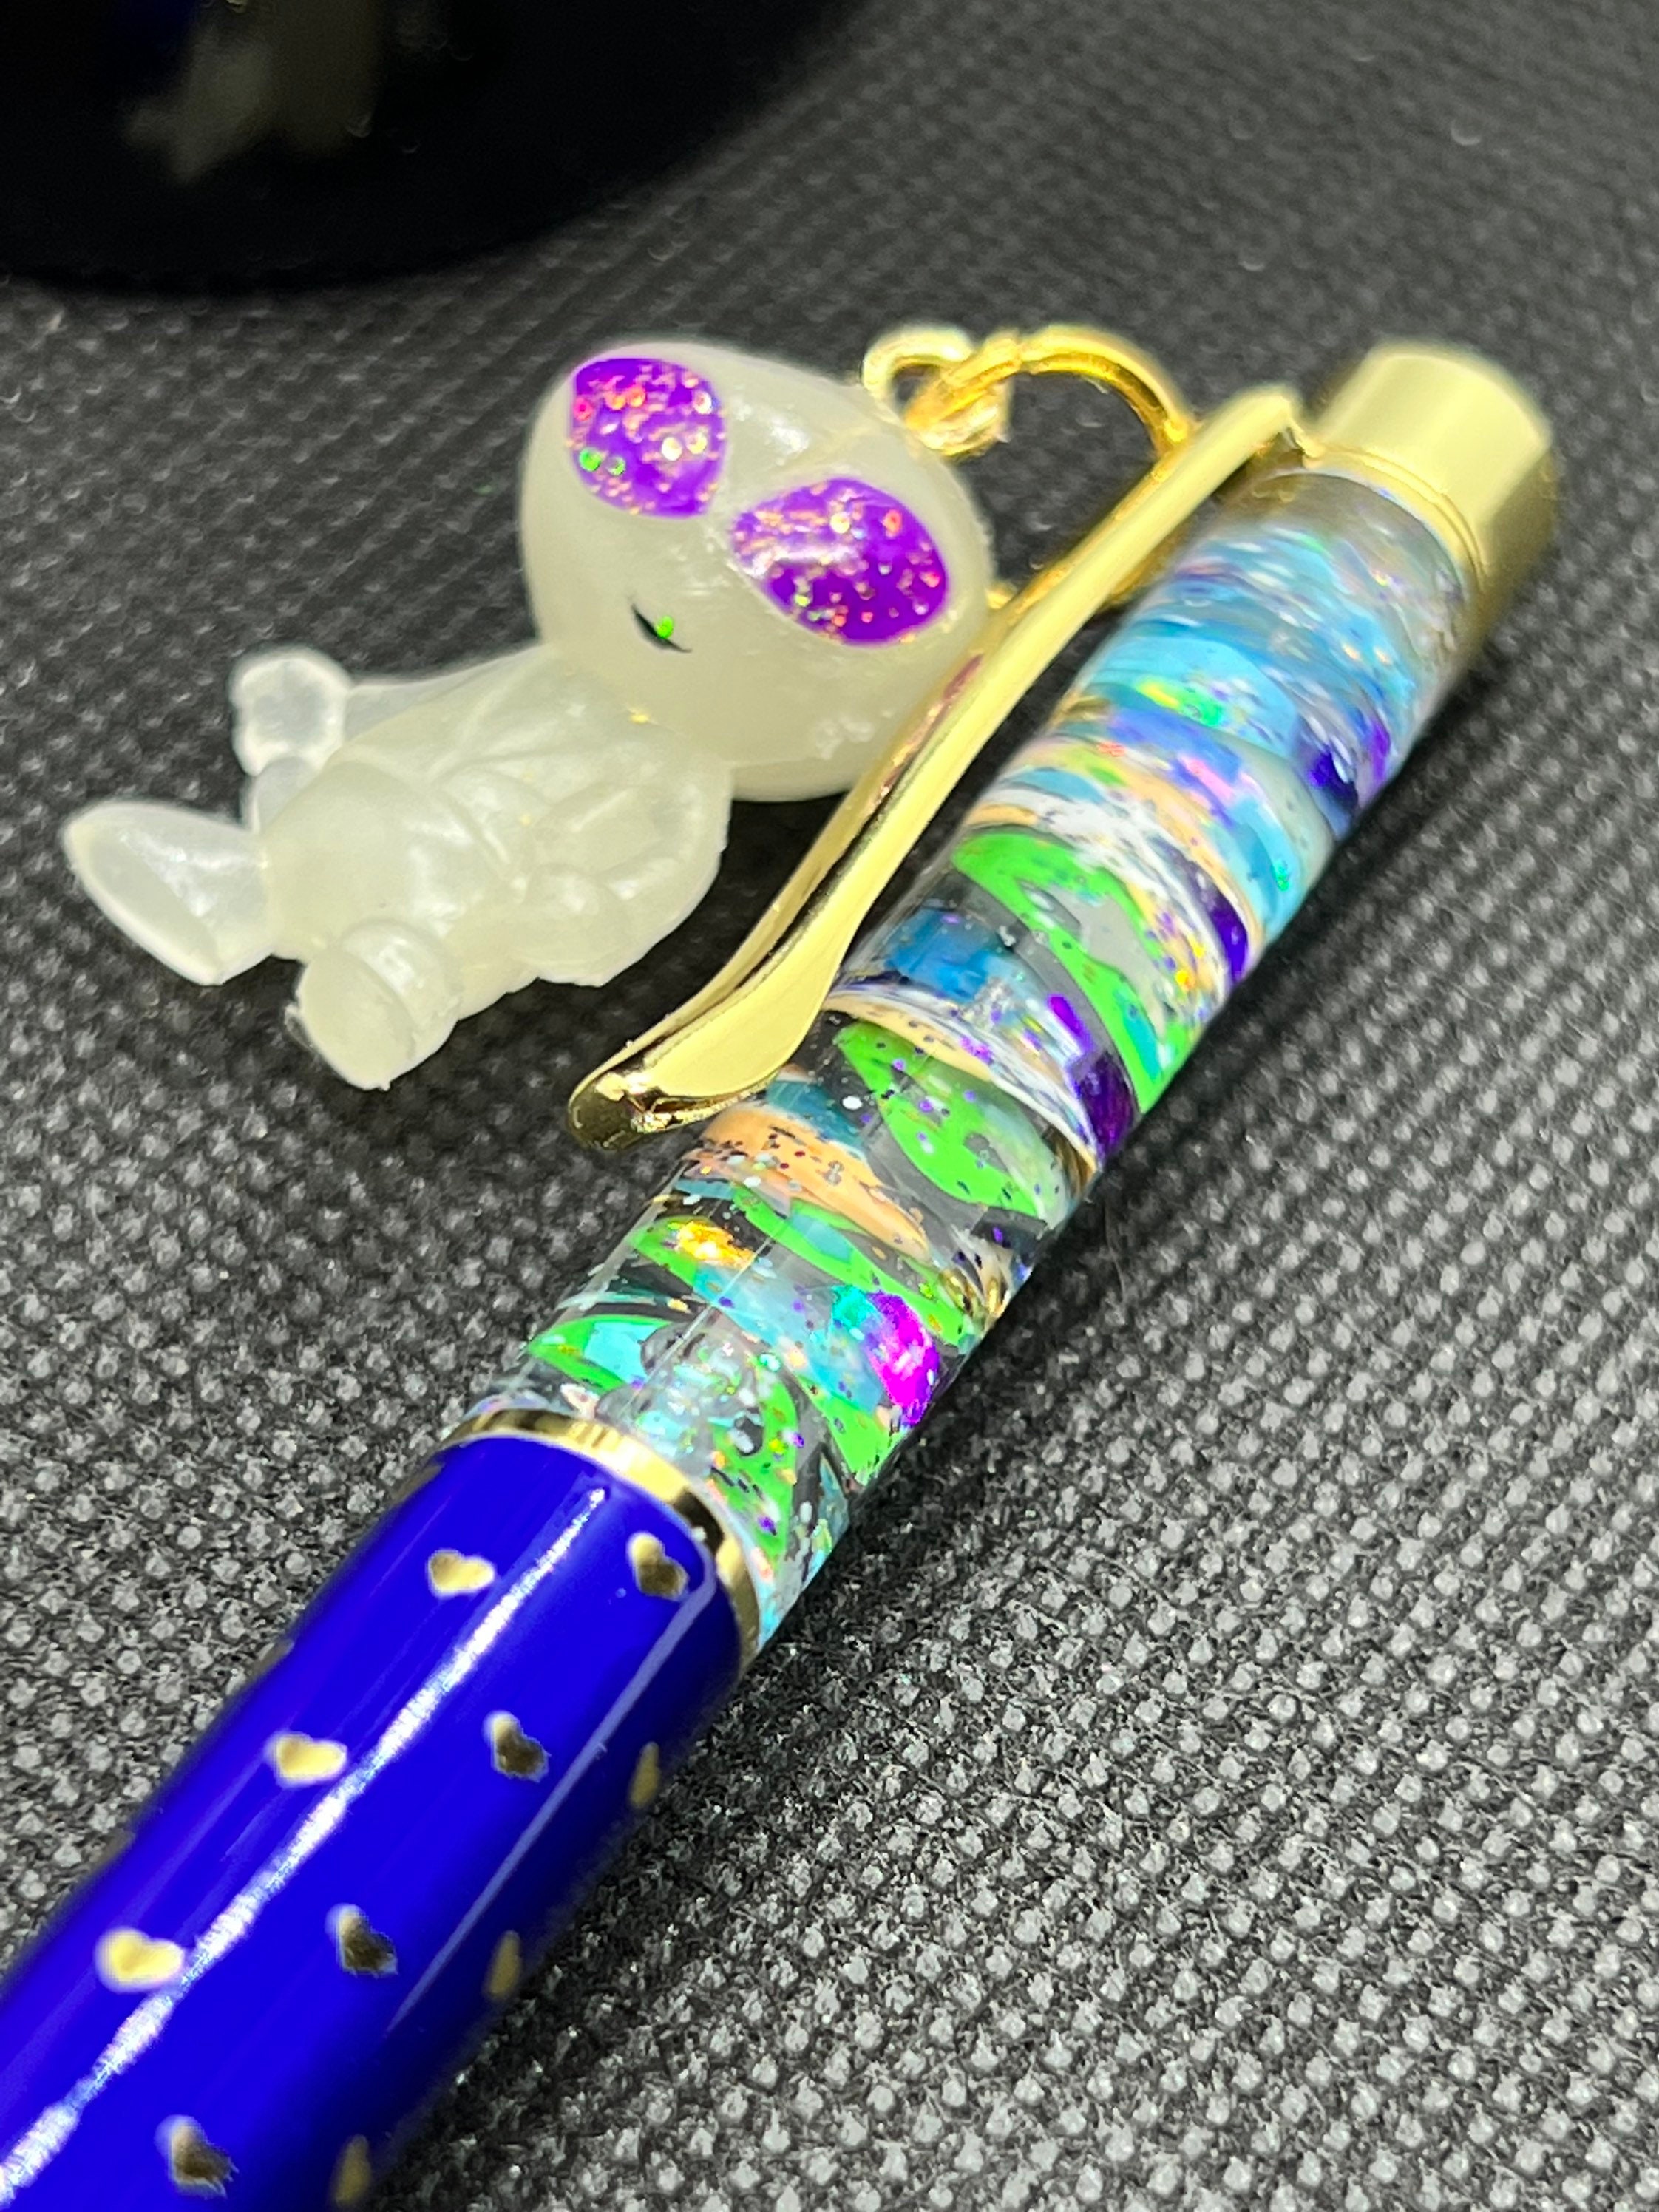 3pcs Plant Growth Pens Cute Pen For Girls Creative Funny